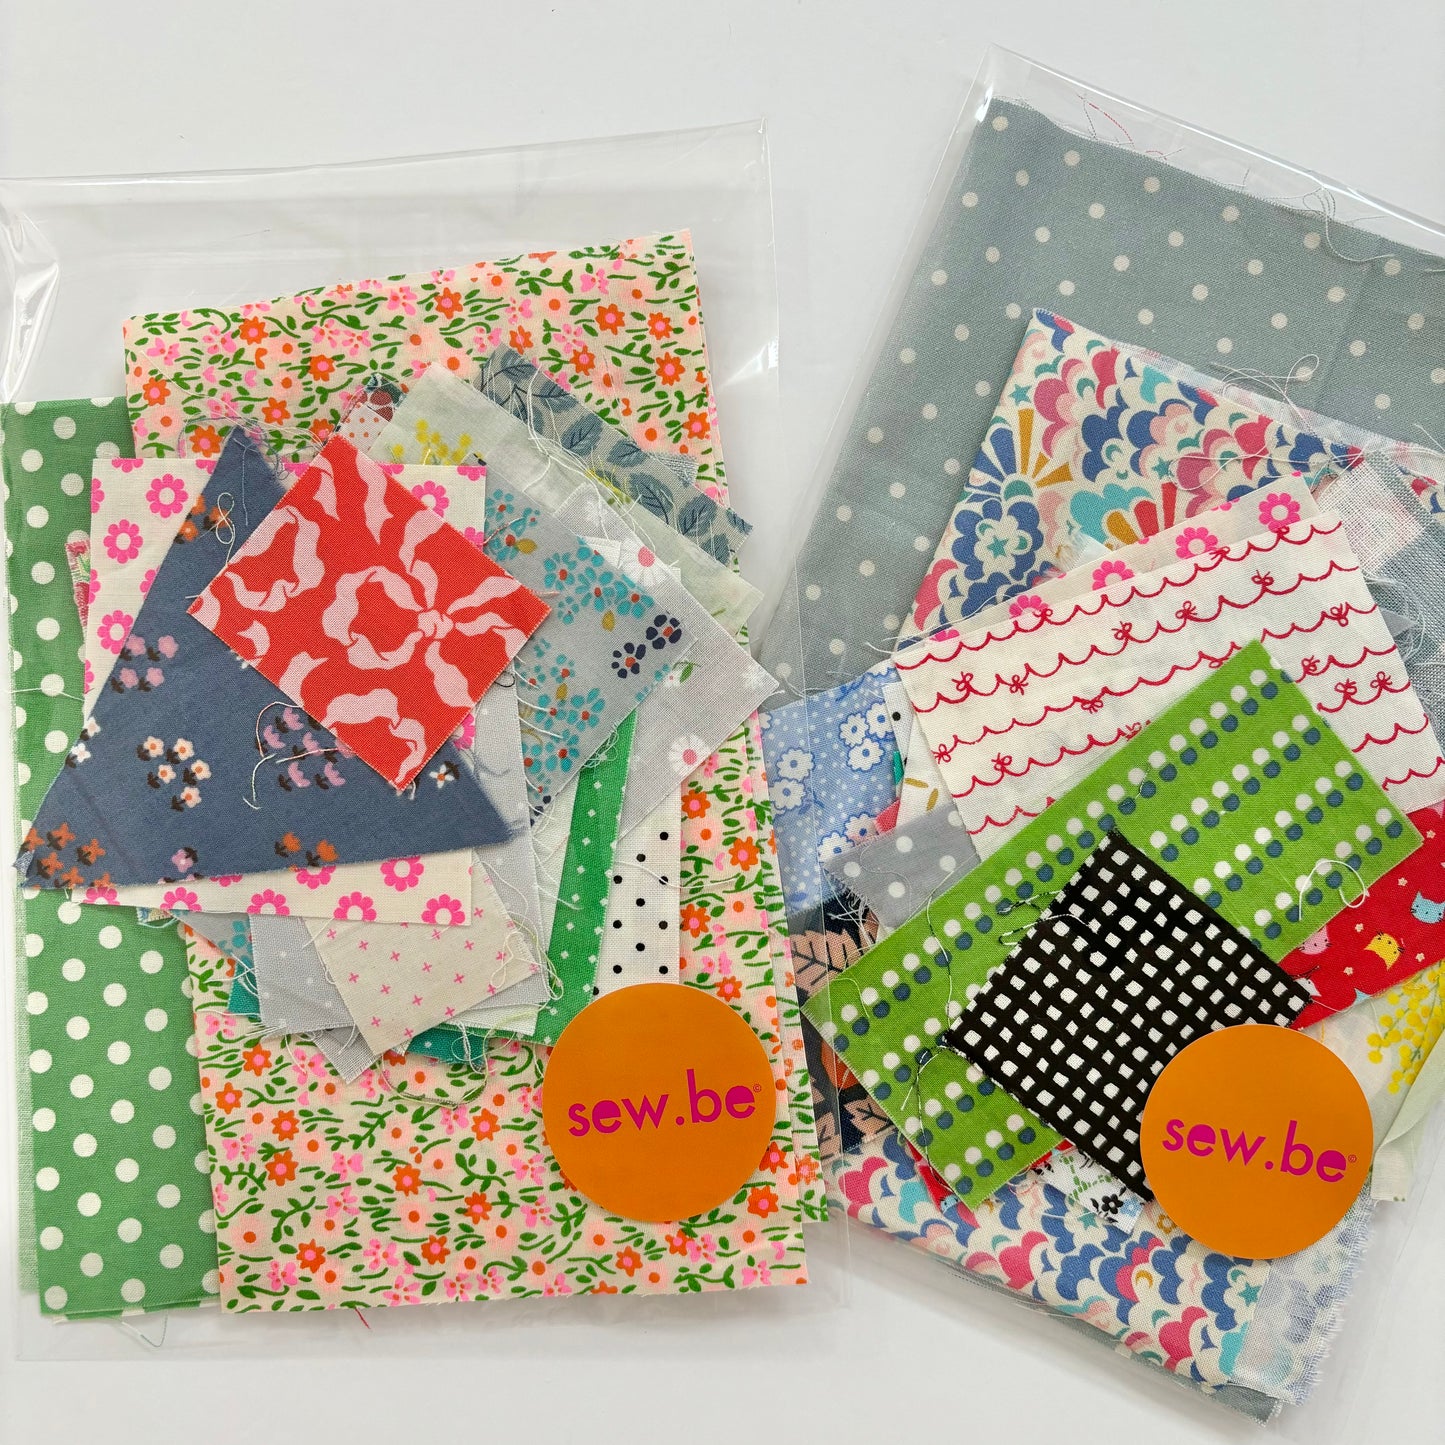 Little Fabric Packs for Scrappy Zipper Pouches from Bec’s Scrap Basket